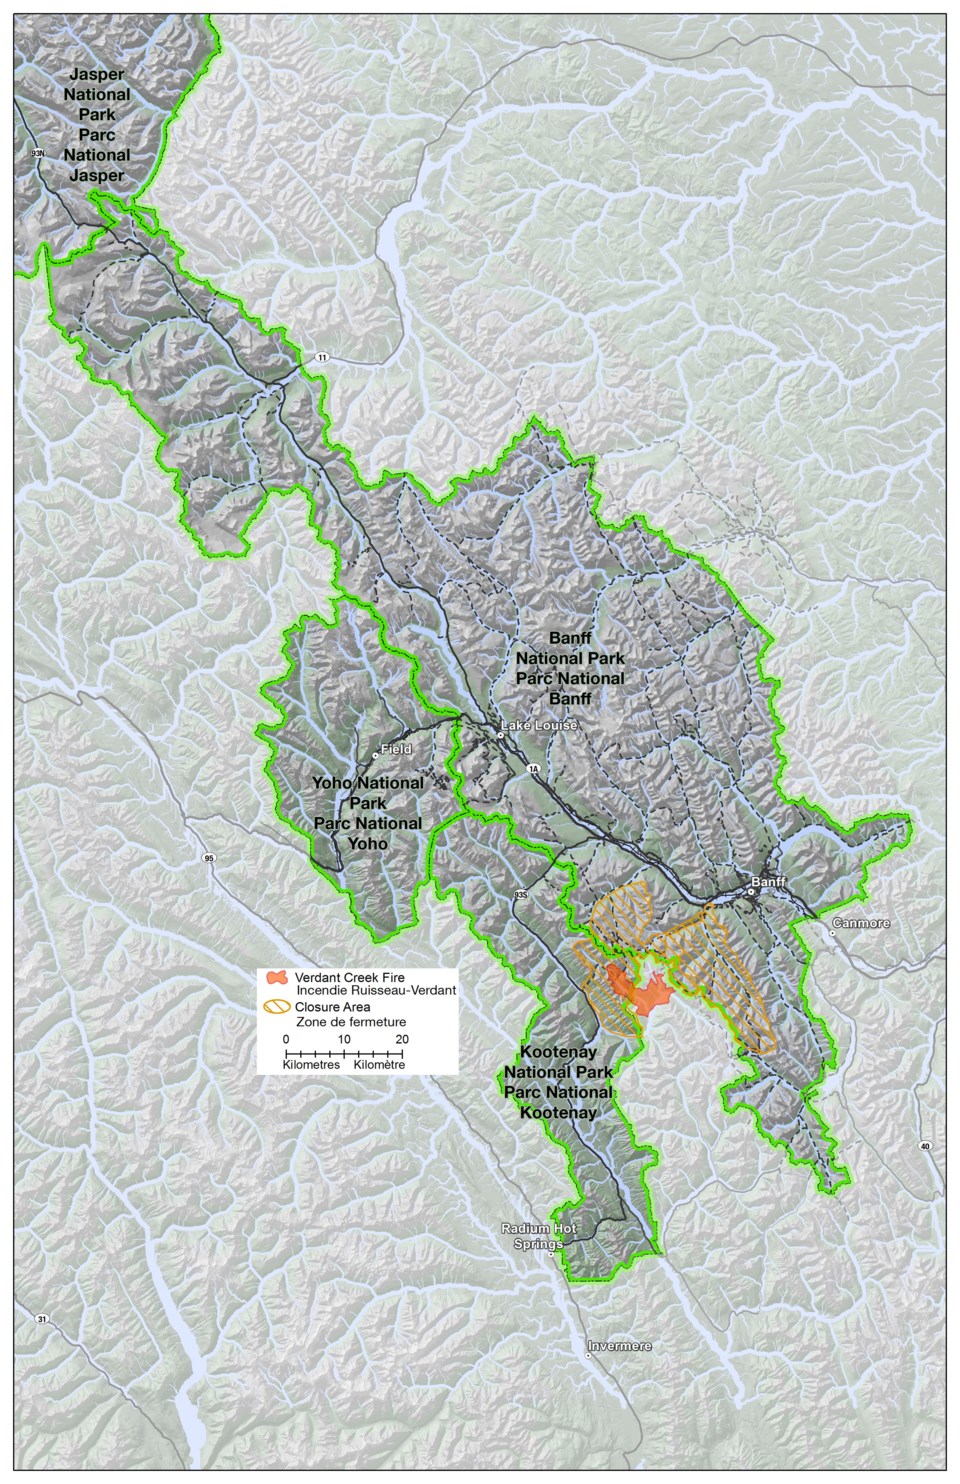 Map of the Verdant Creek wildfire provided by Parks Canada Saturday (July 22).